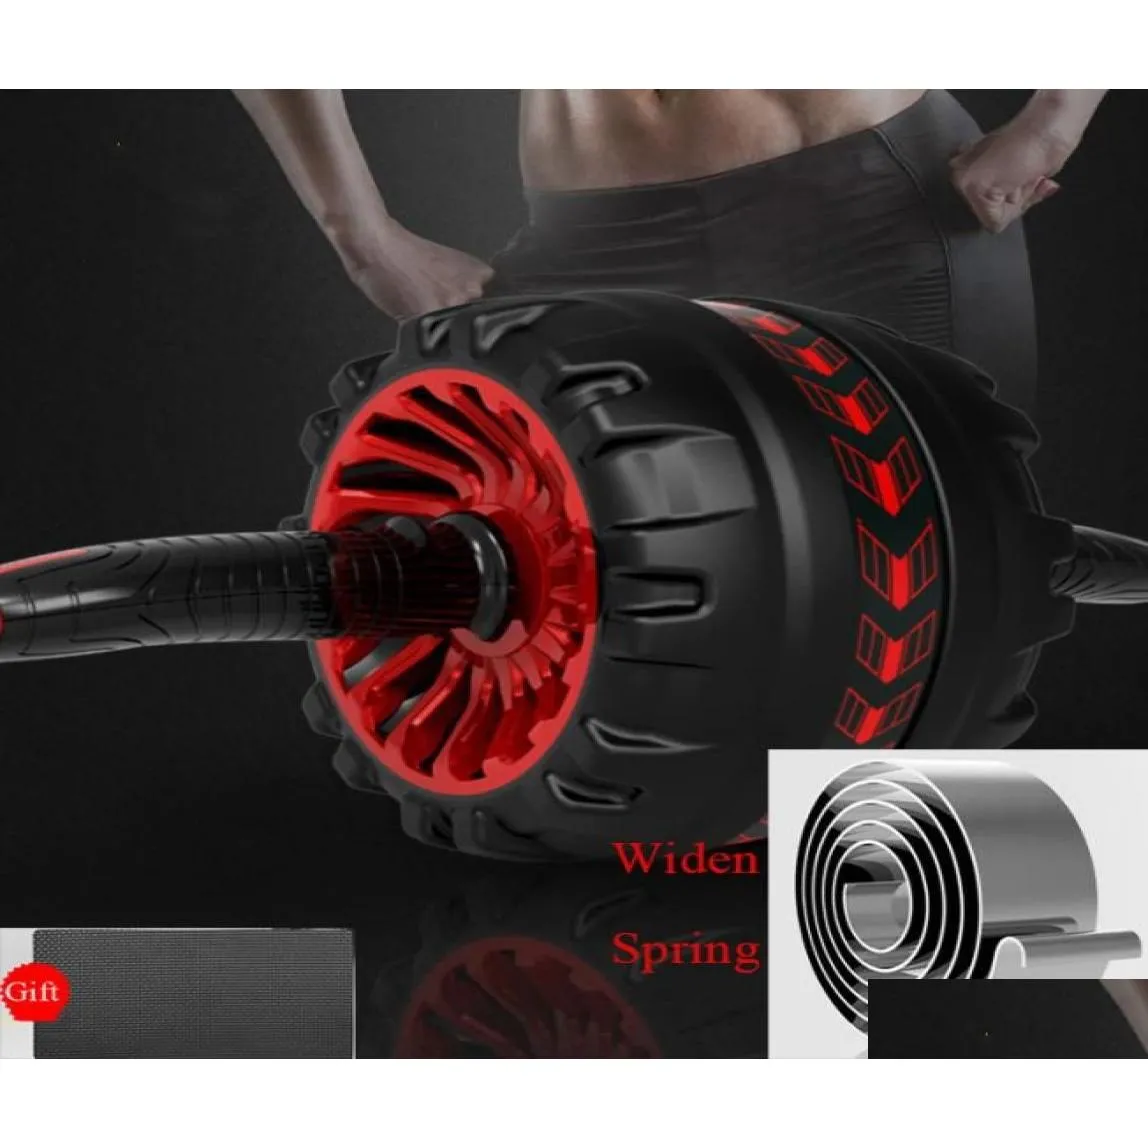 Attrezzatura per l'allenamento Fitness Ab Roller Palestra a casa Abs Wheel Press Addominale Trainer Widen Strong Spring Matic Rebound Workout Drop Deliv Dhf1N